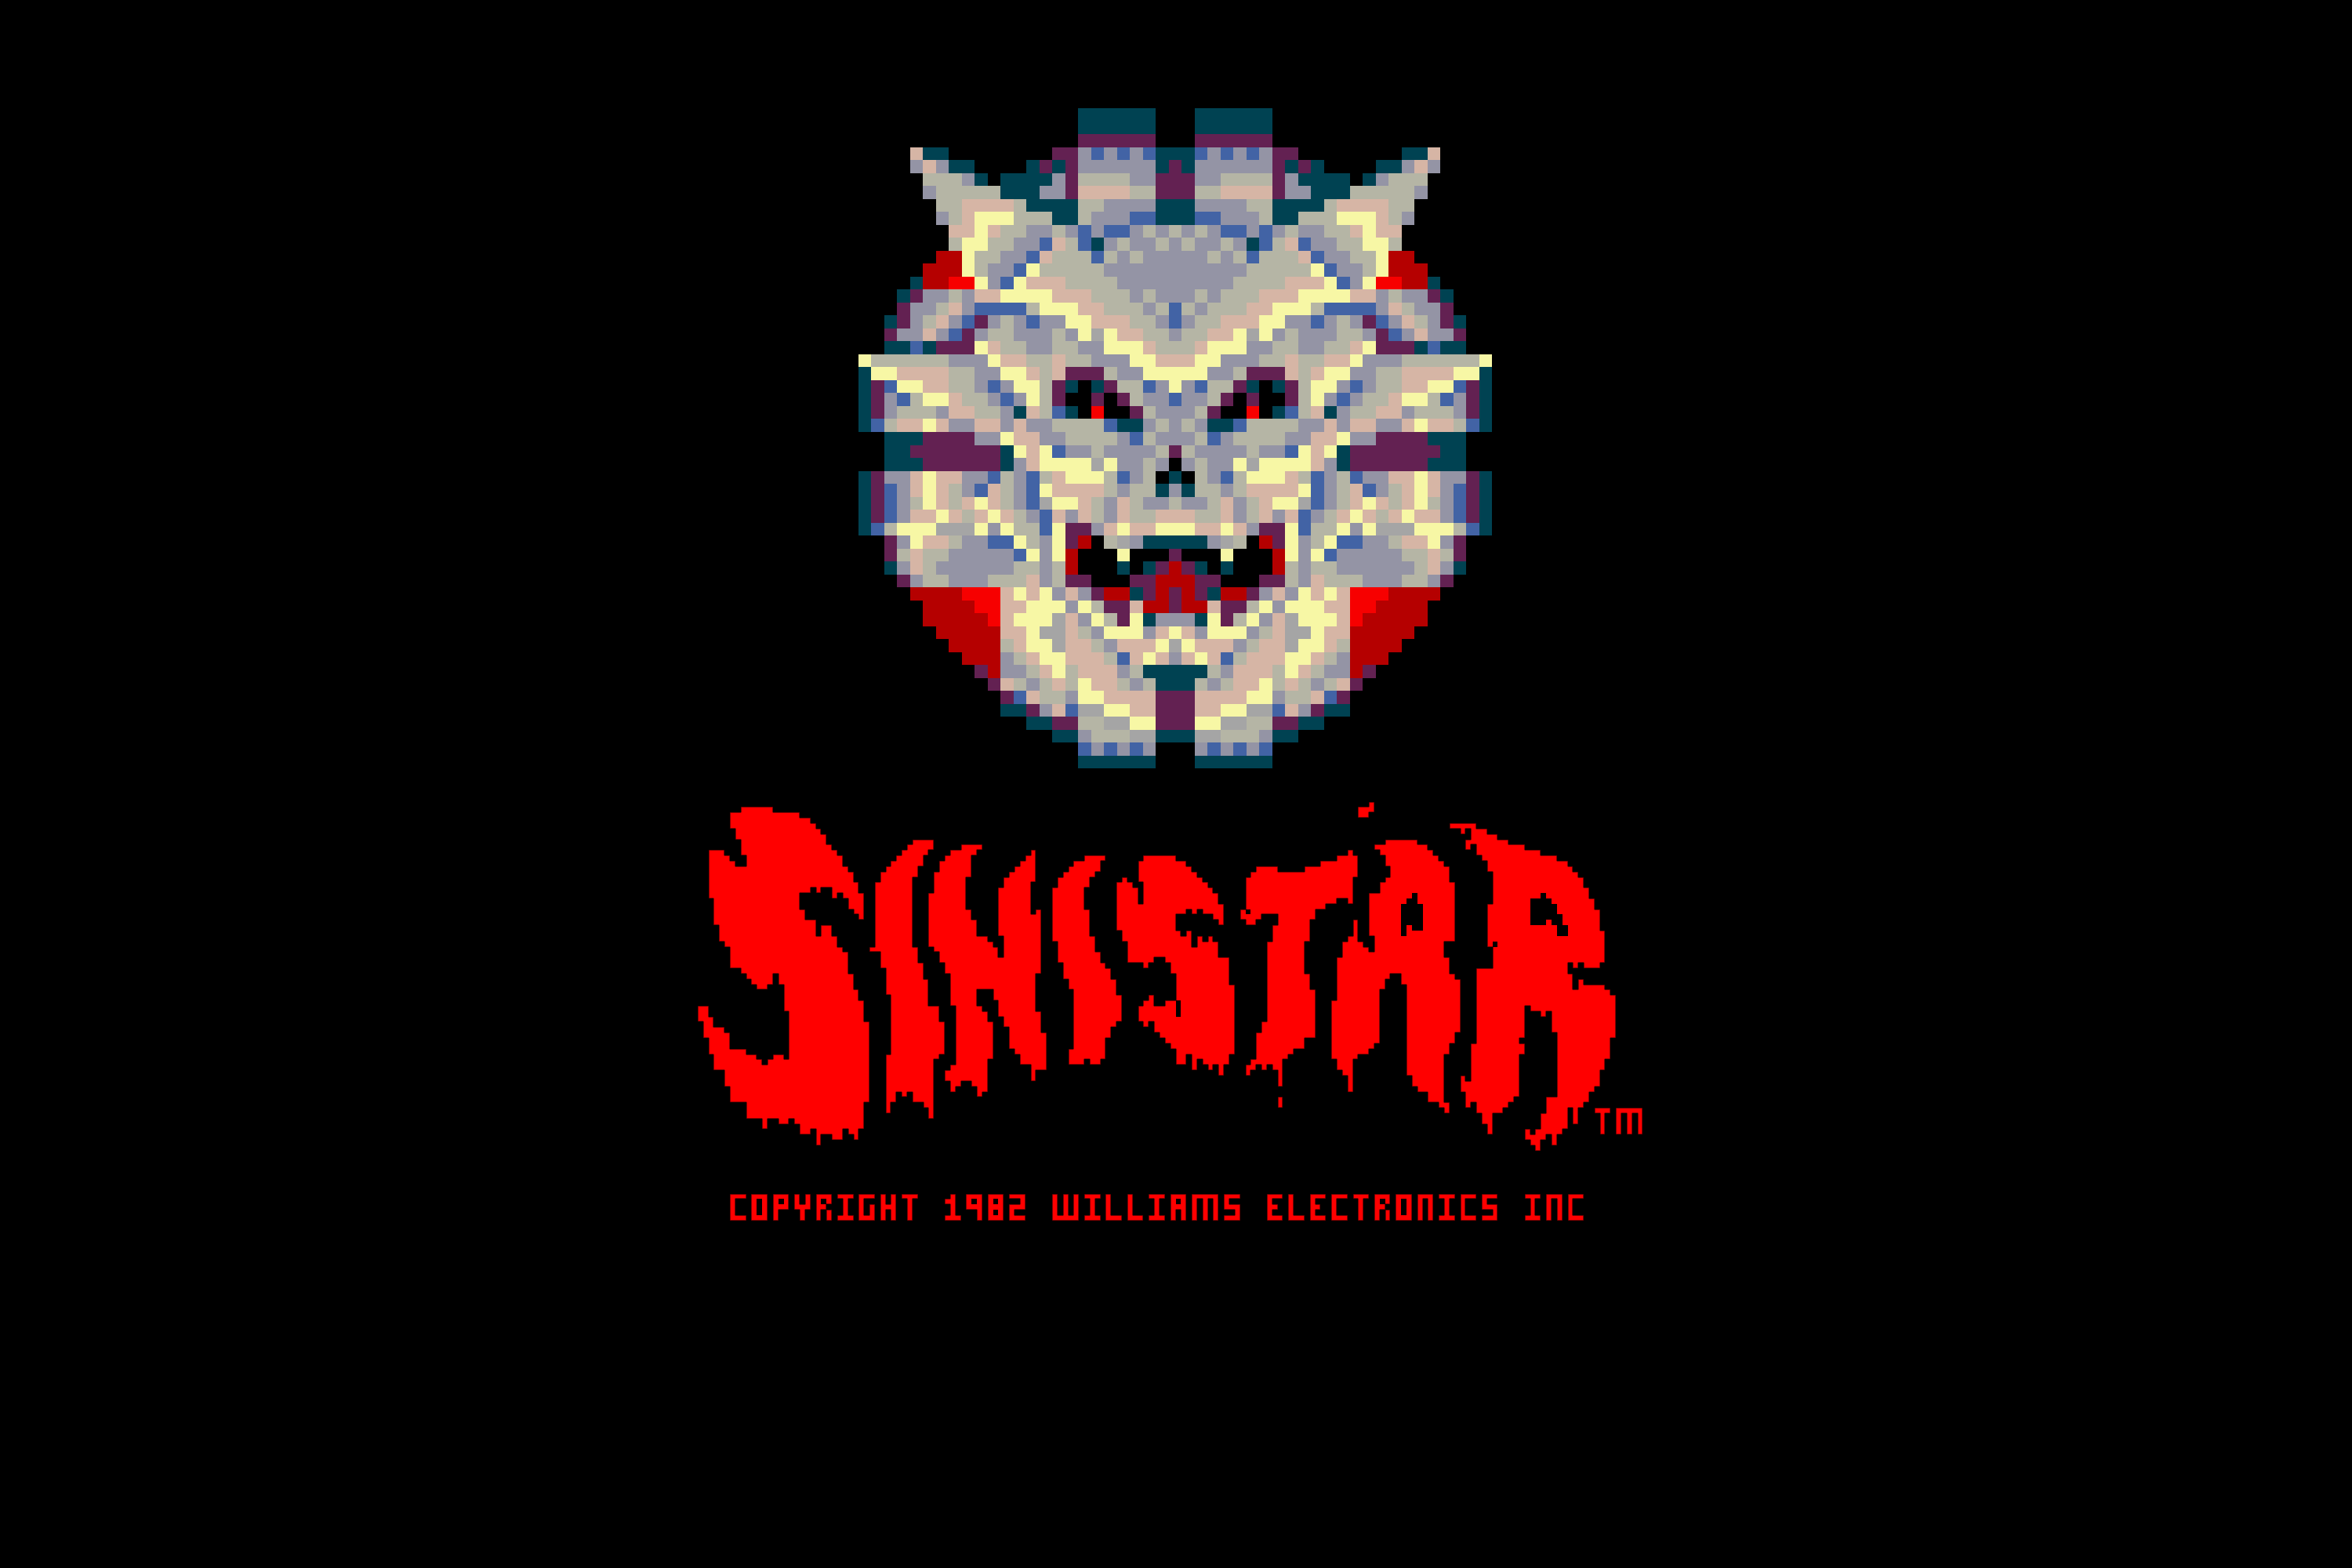 Made this Sinistar wallpaper for myself, maybe other people